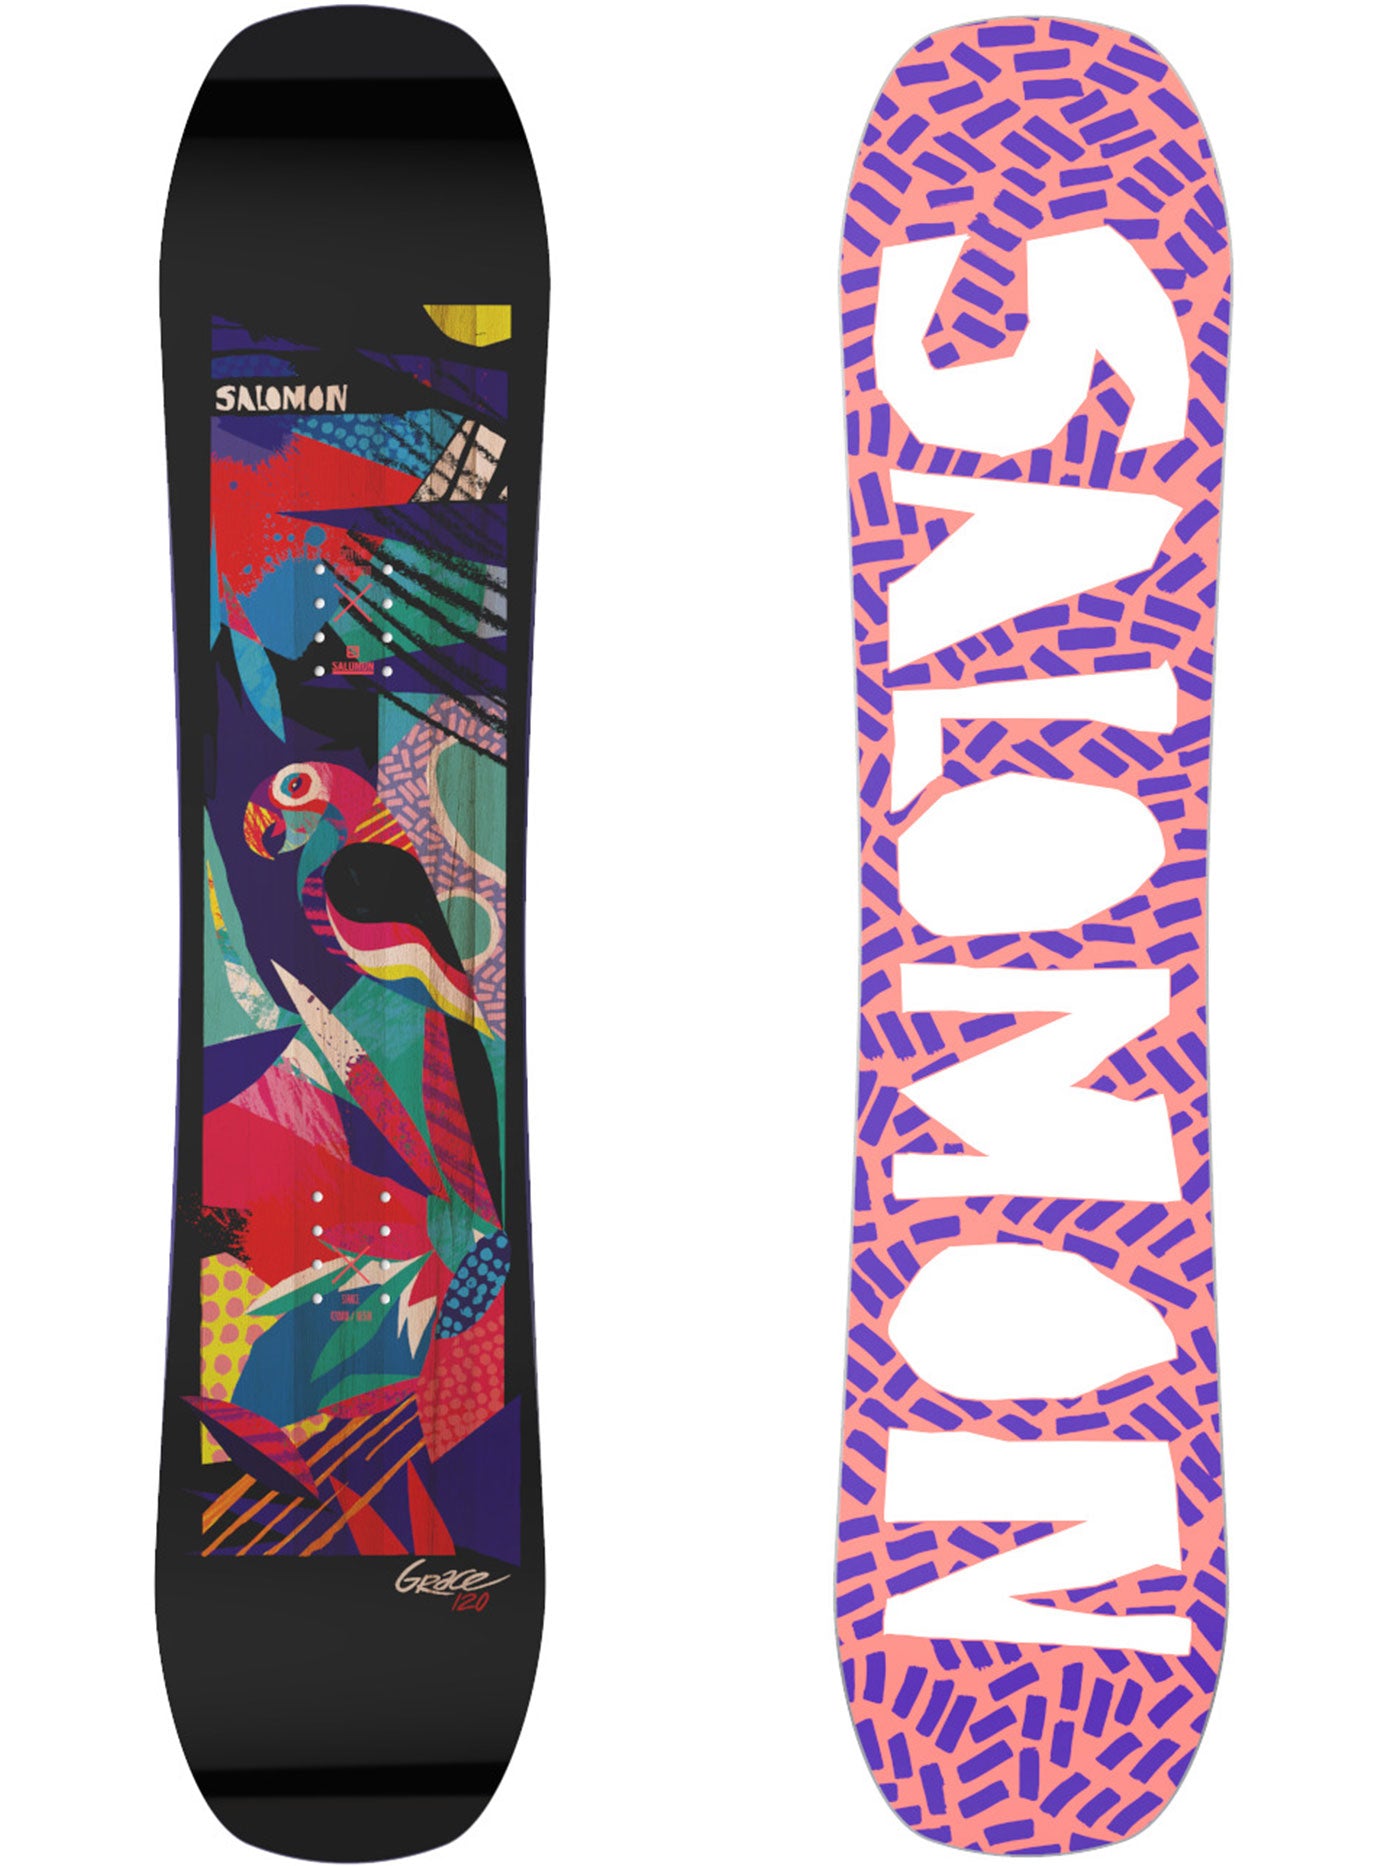 Grace Snowboard (Youth)